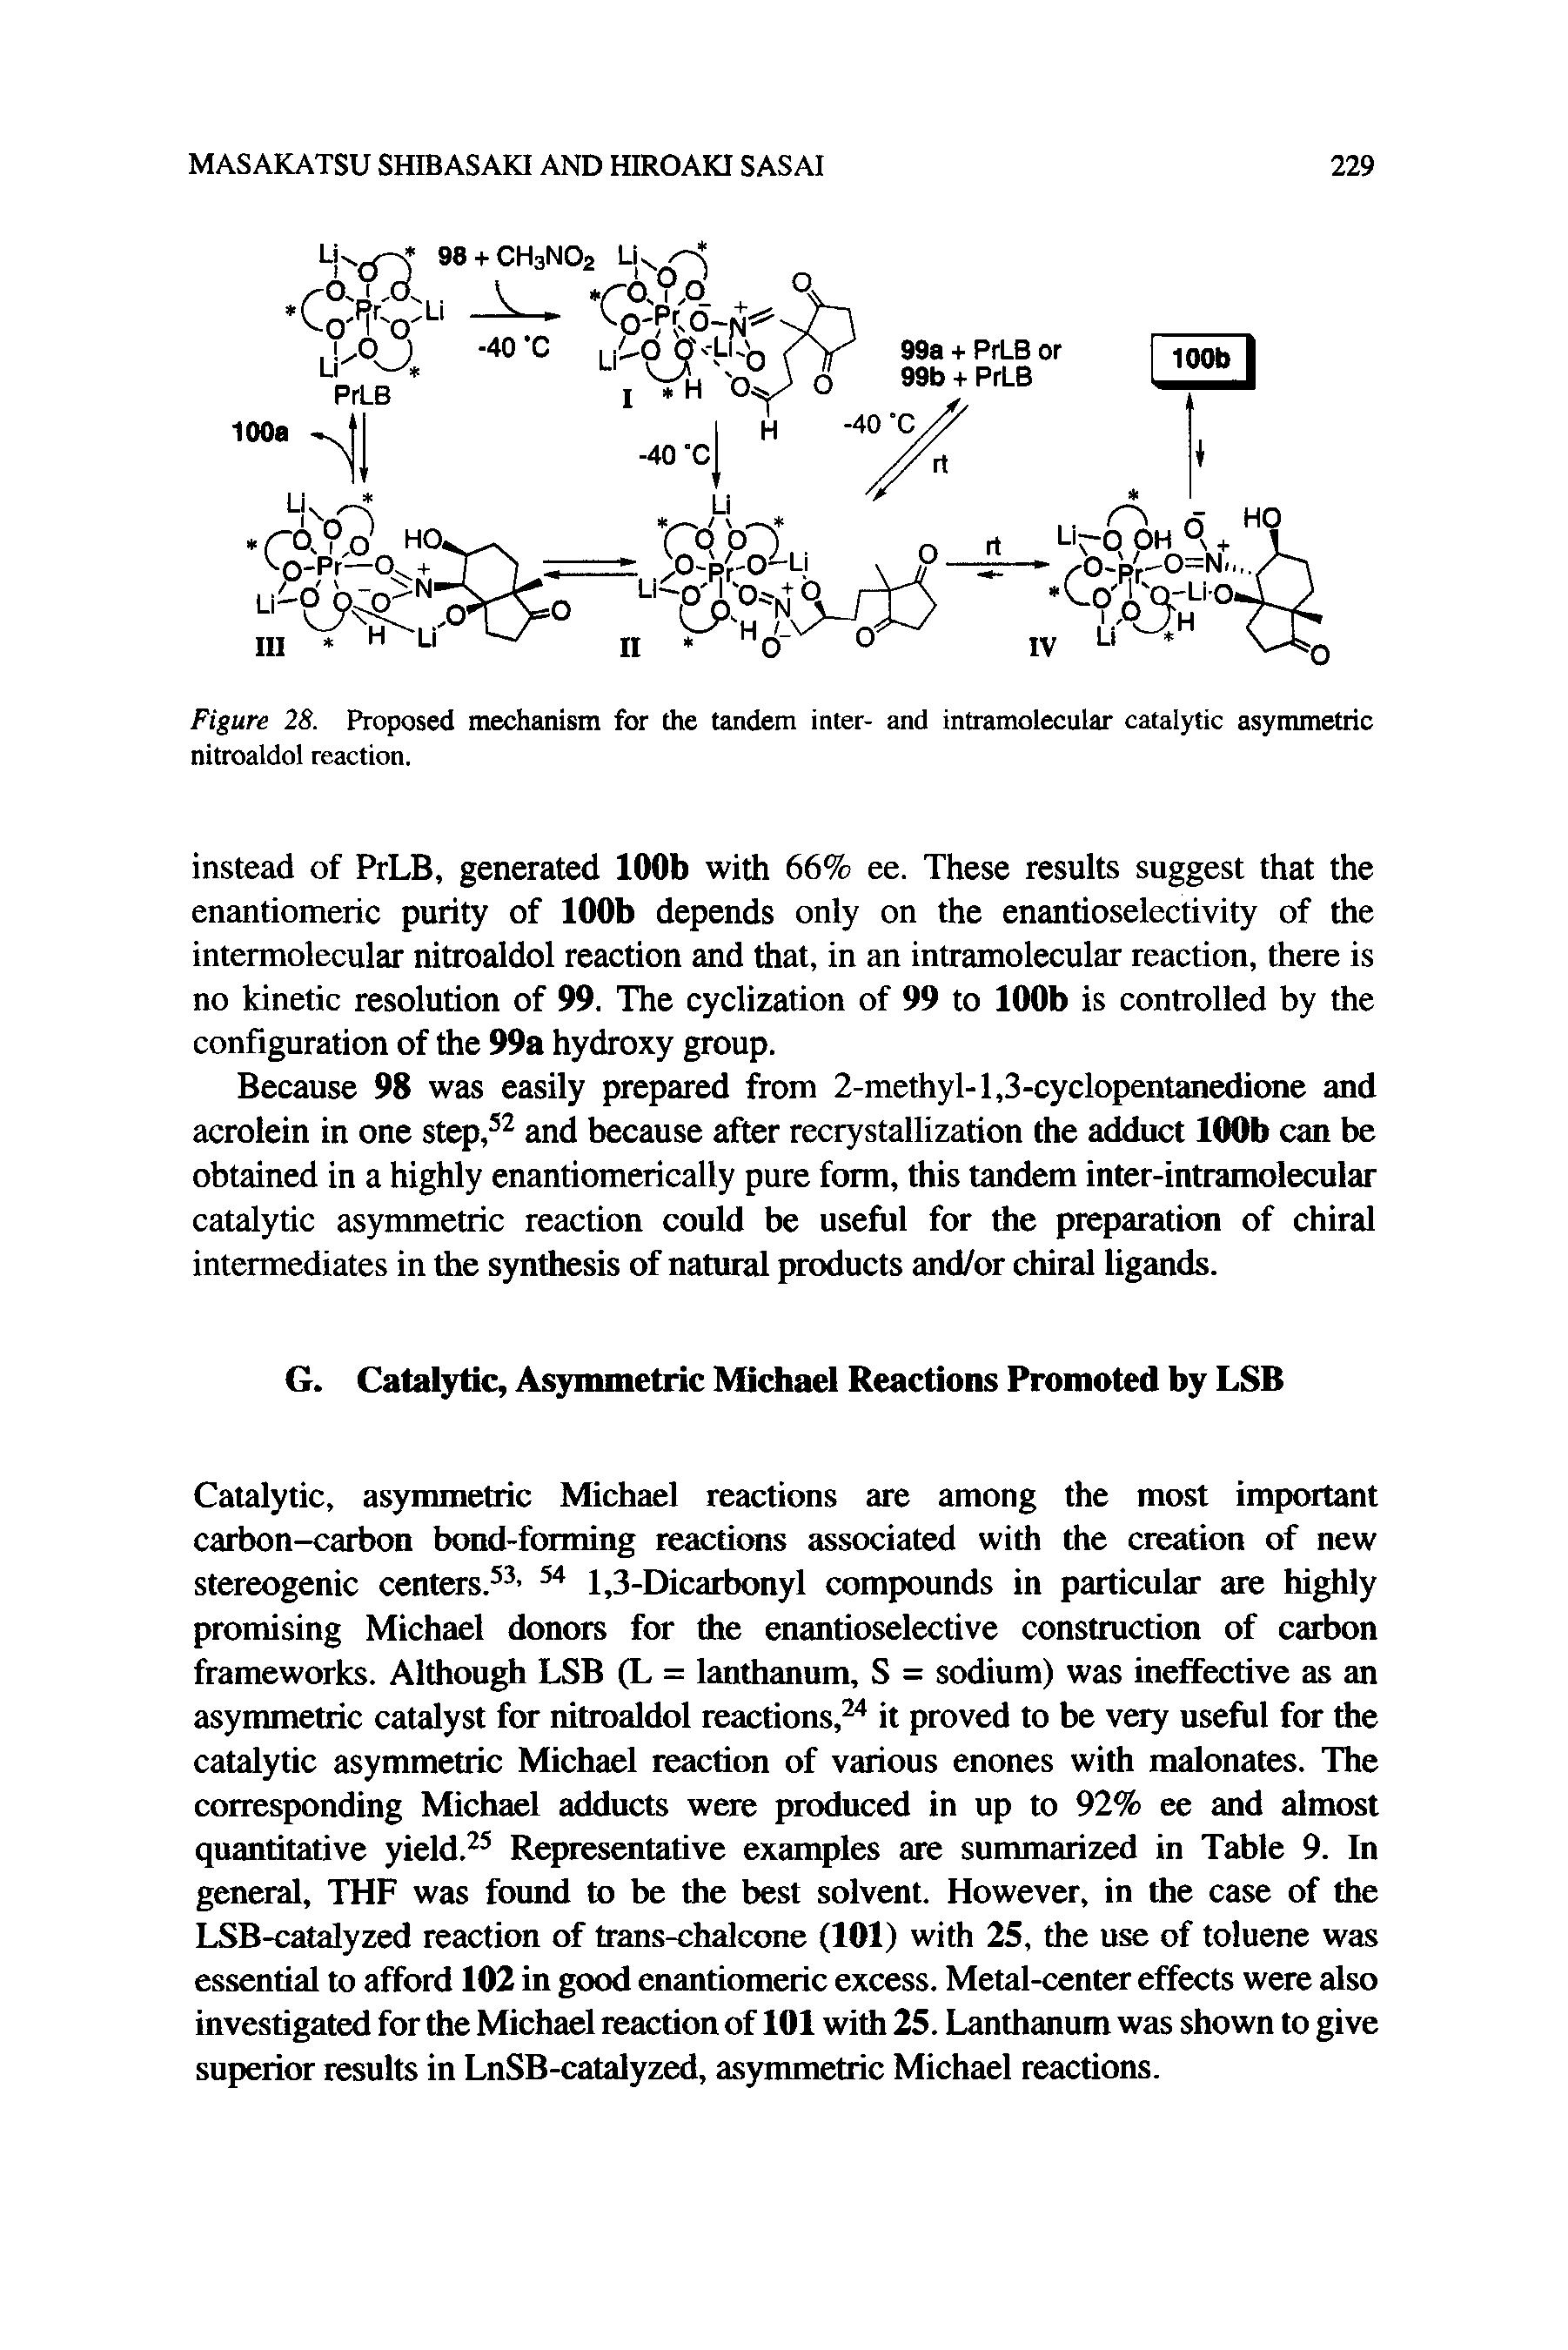 Figure 28. Proposed mechanism for the tandem inter- and intramolecular catalytic asymmetric nitroaldol reaction.